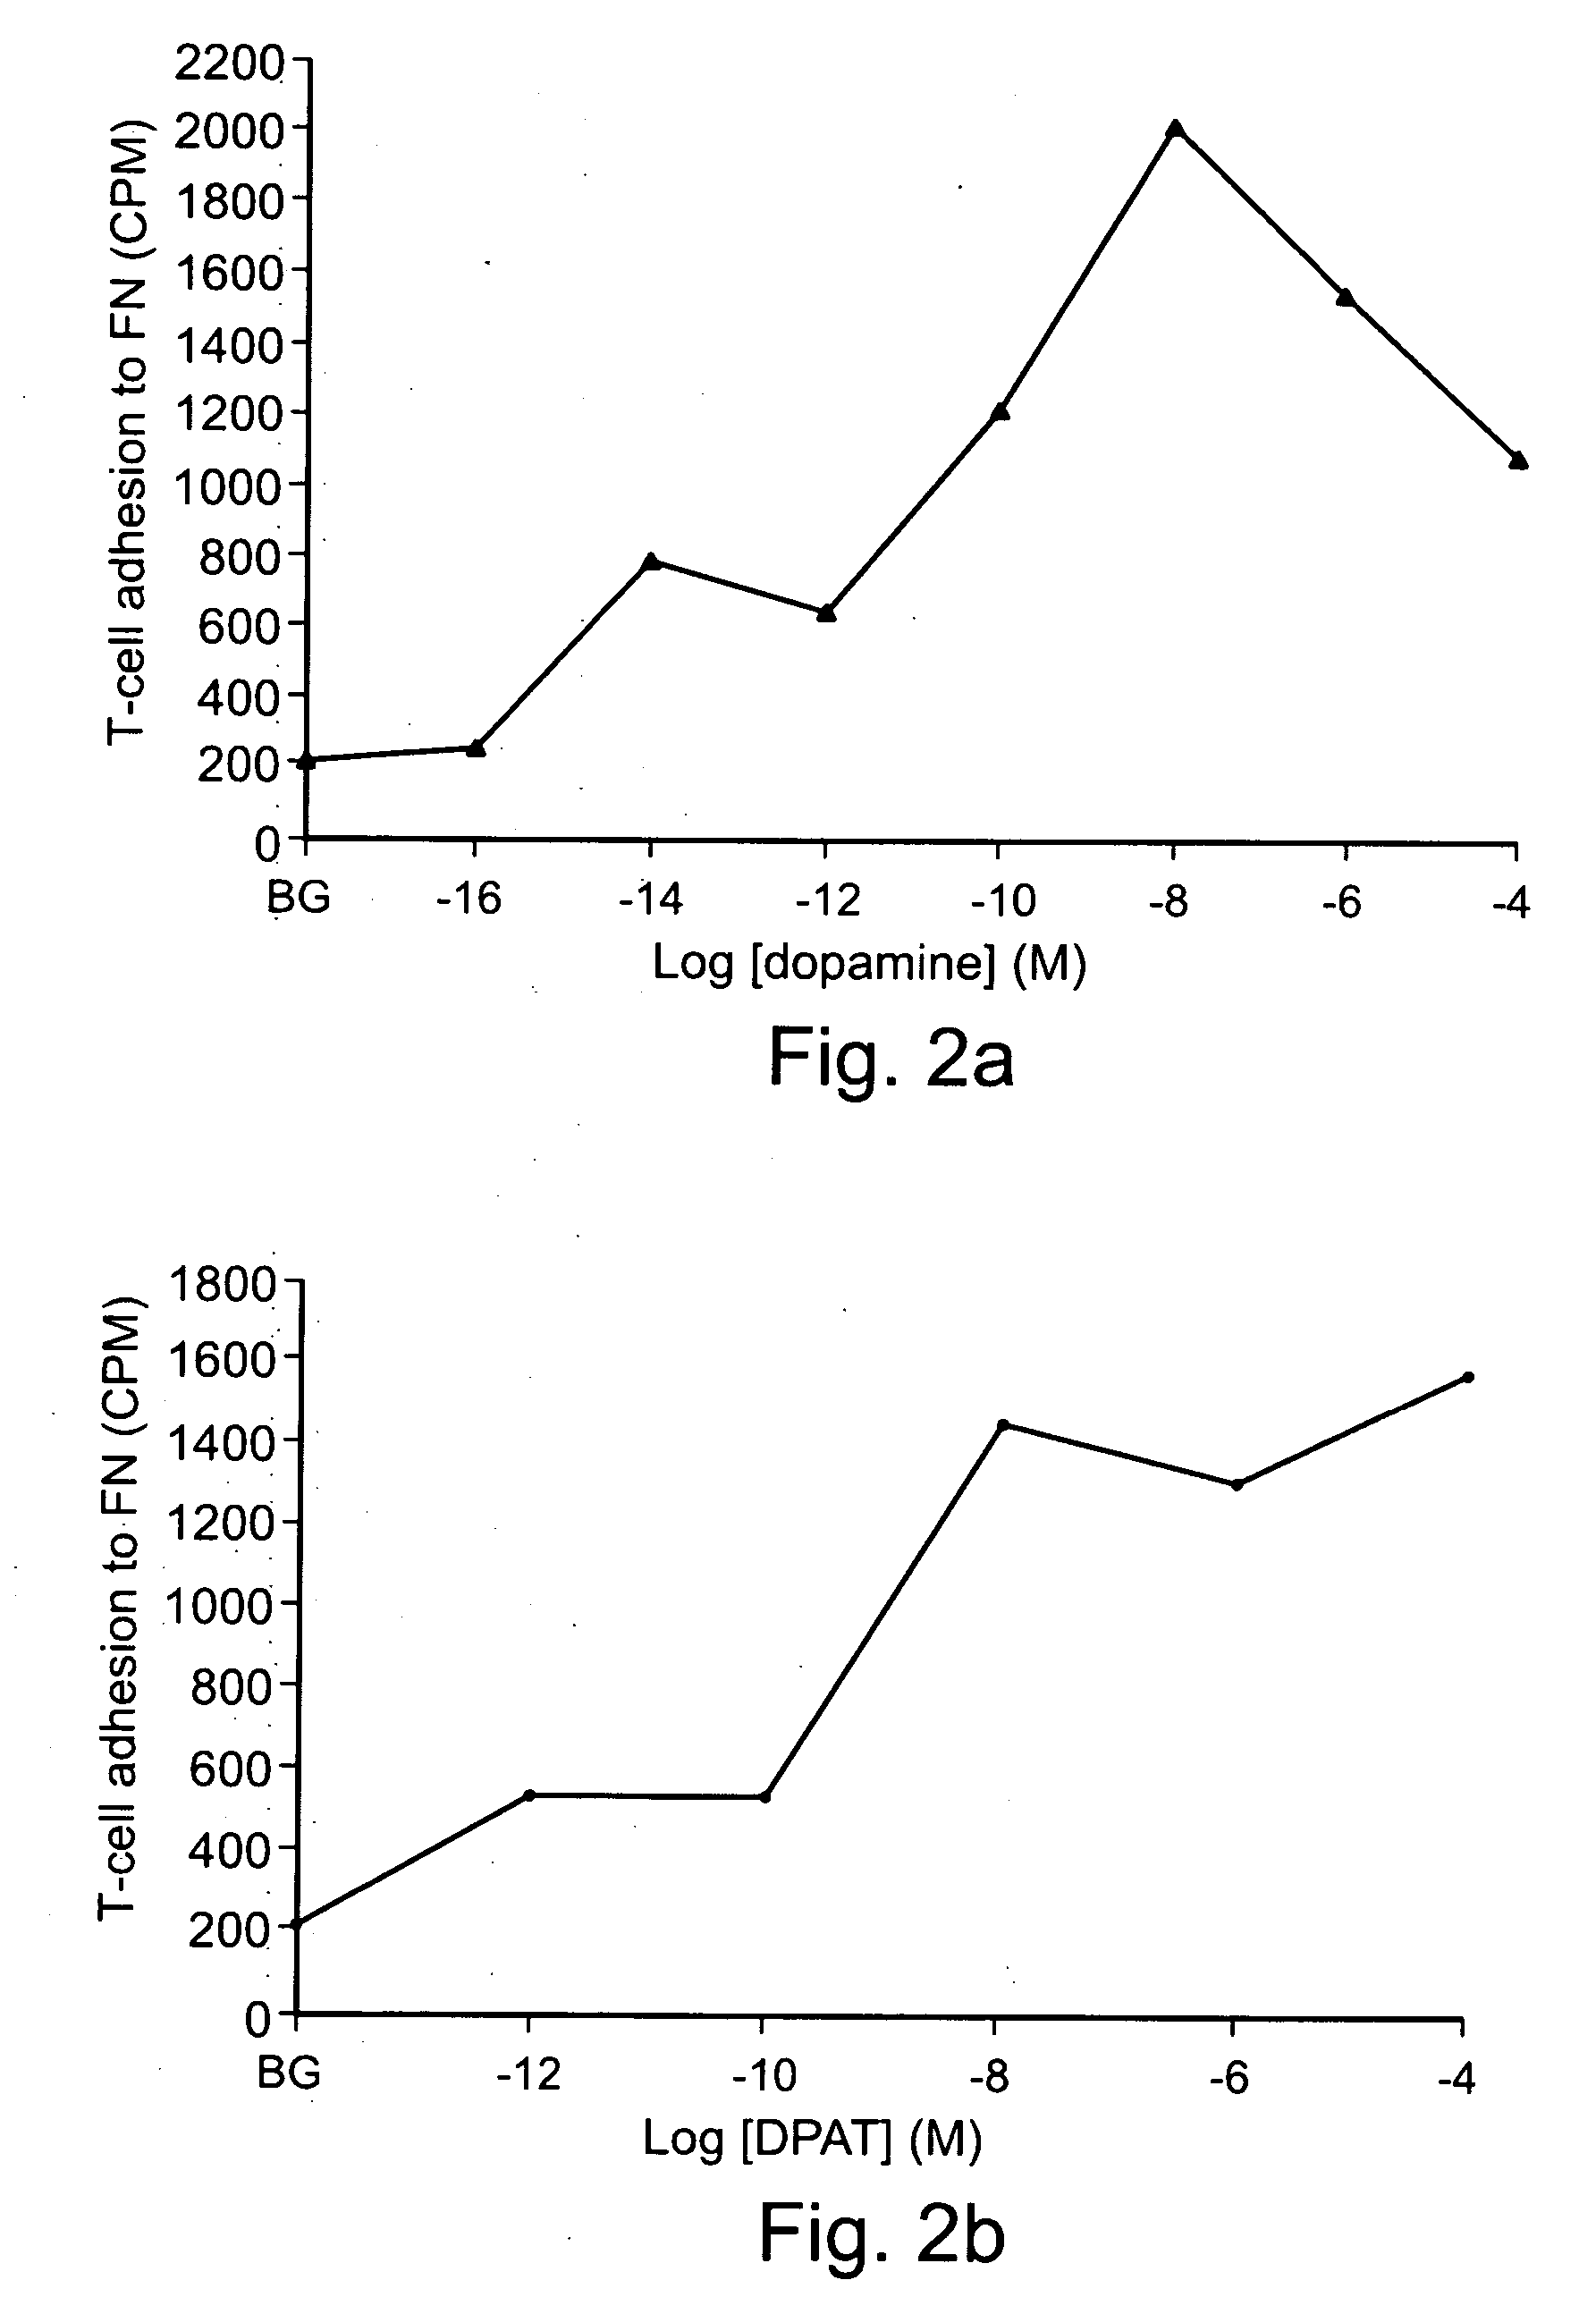 Methods and pharmaceutical compositions for dopaminergic modulation of t-cell adhesion and activity